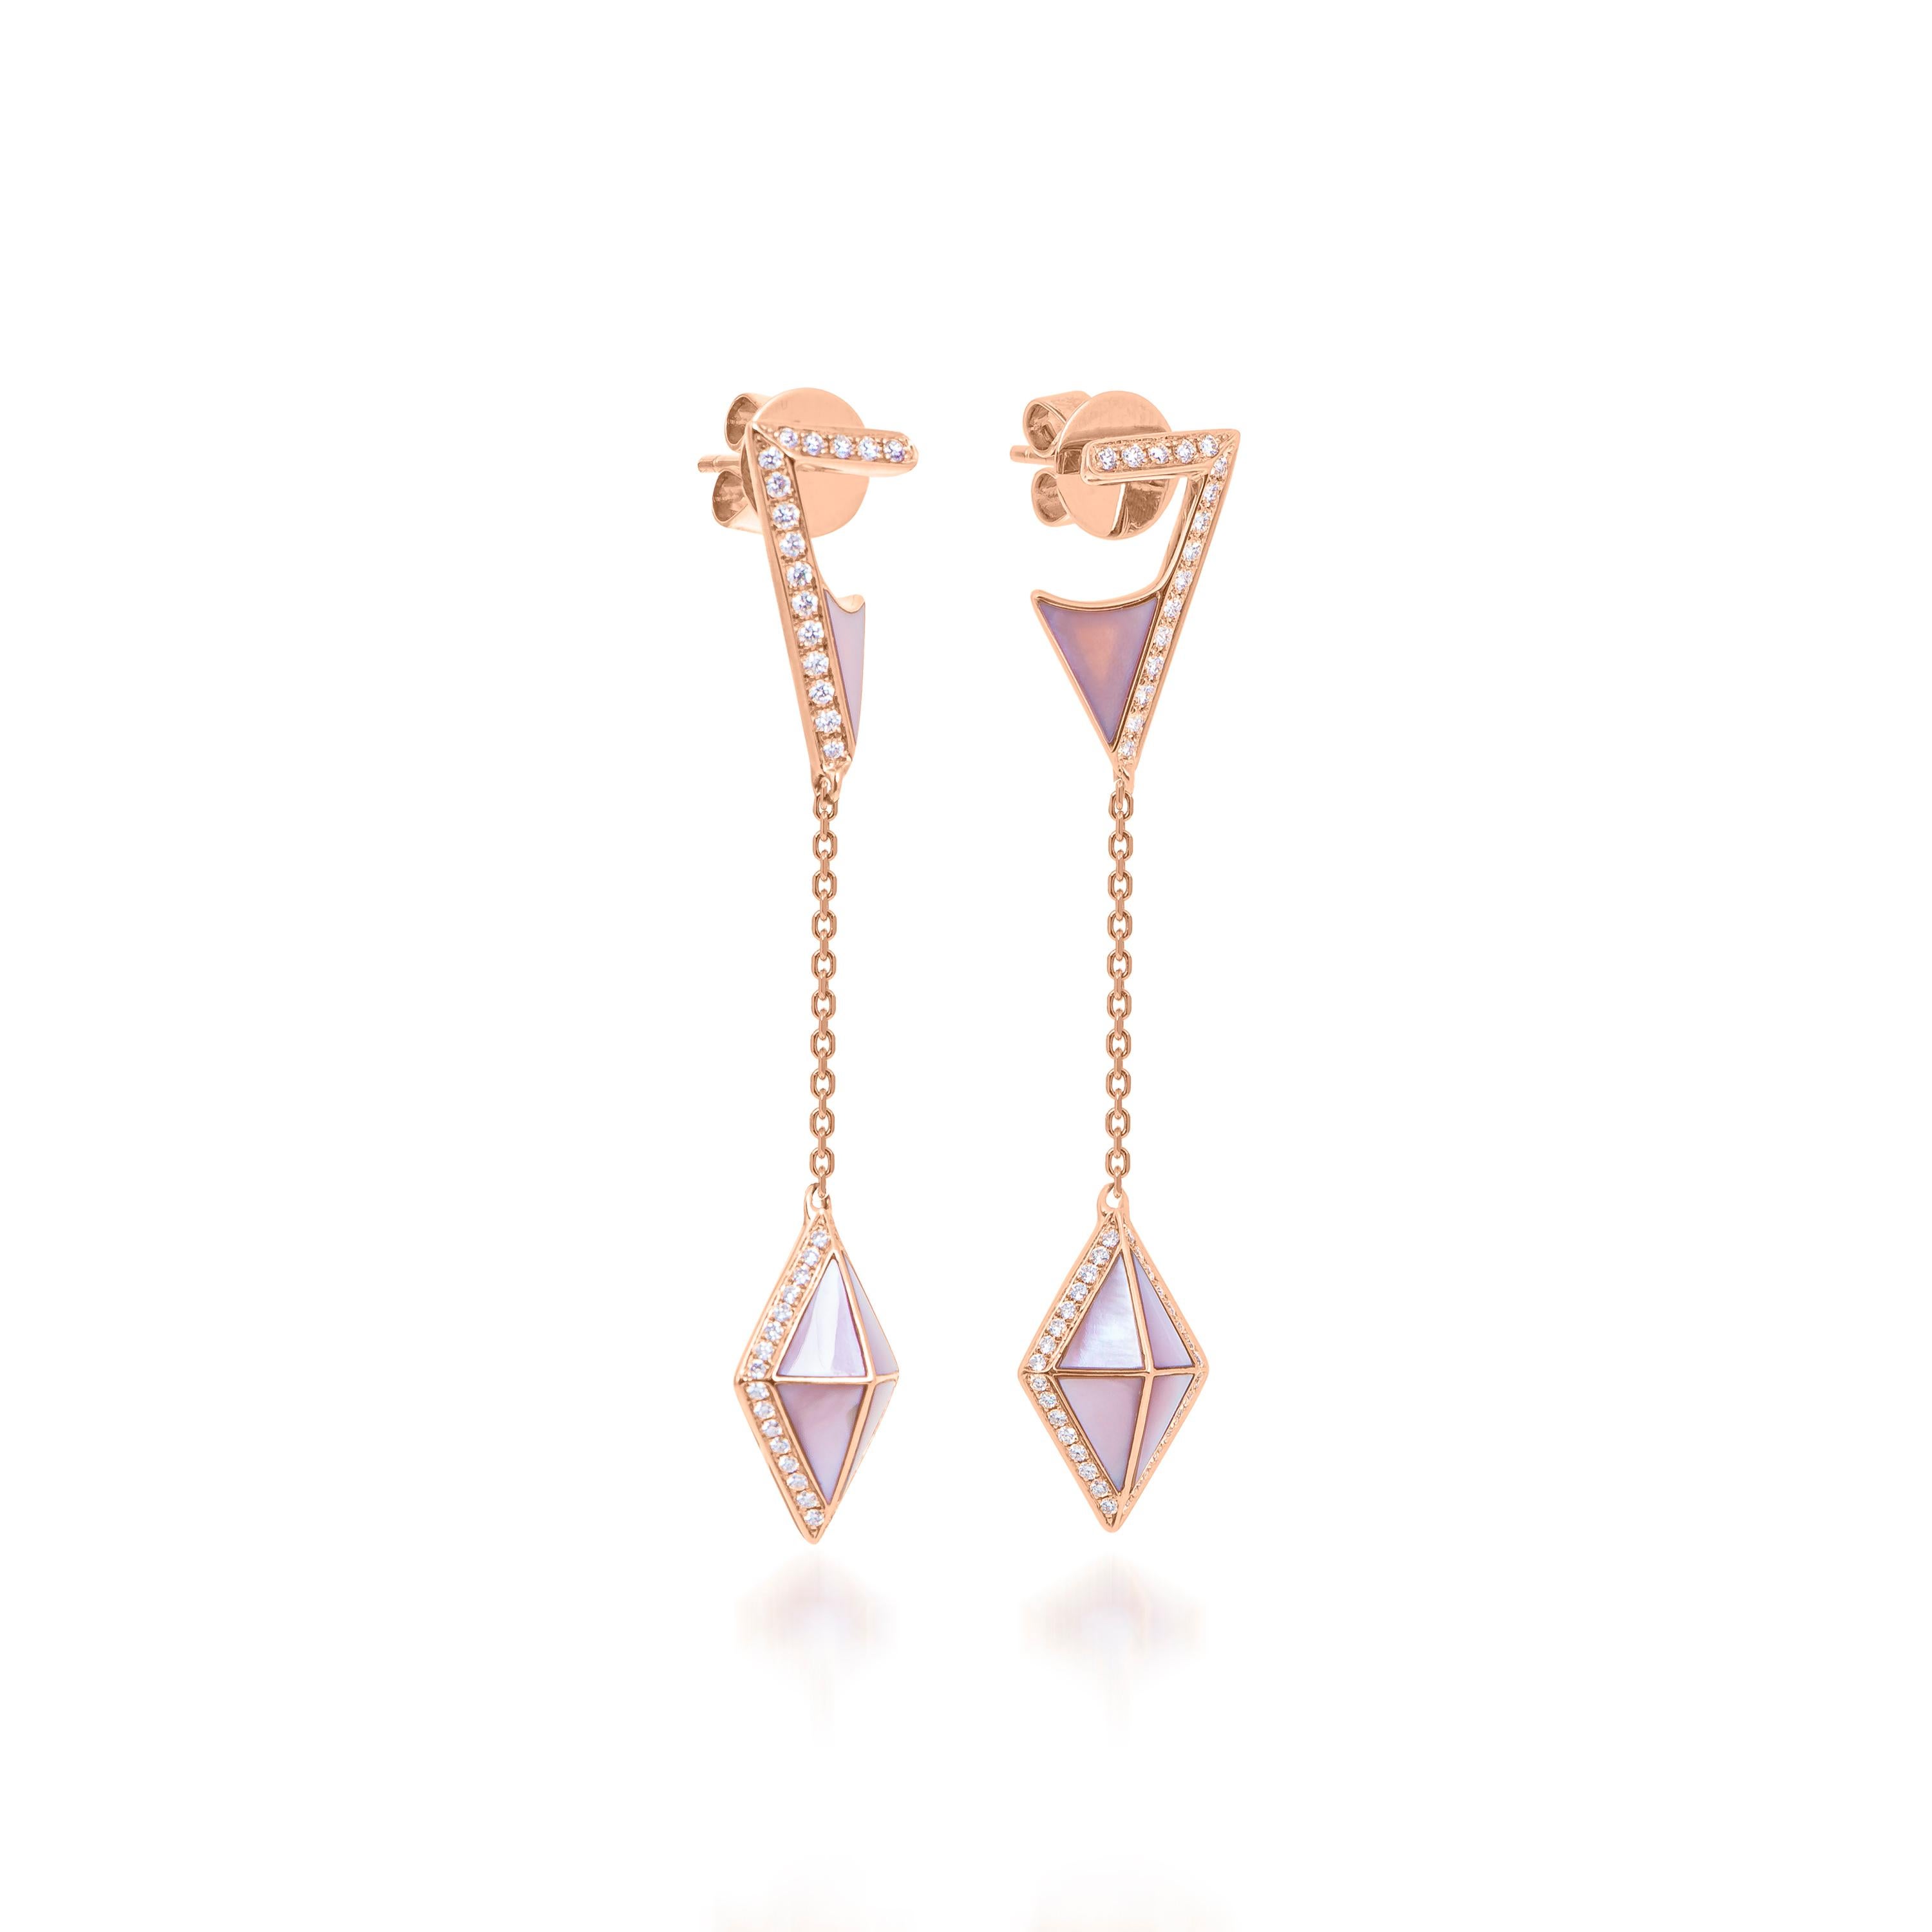 Through graphic, contemporary lines, Butani’s Tetra collection celebrates the beauty of symmetry while reimagining classic motifs of the past. 

Flowing from the ear towards the shoulders with finesse, these graceful drop earrings celebrate the